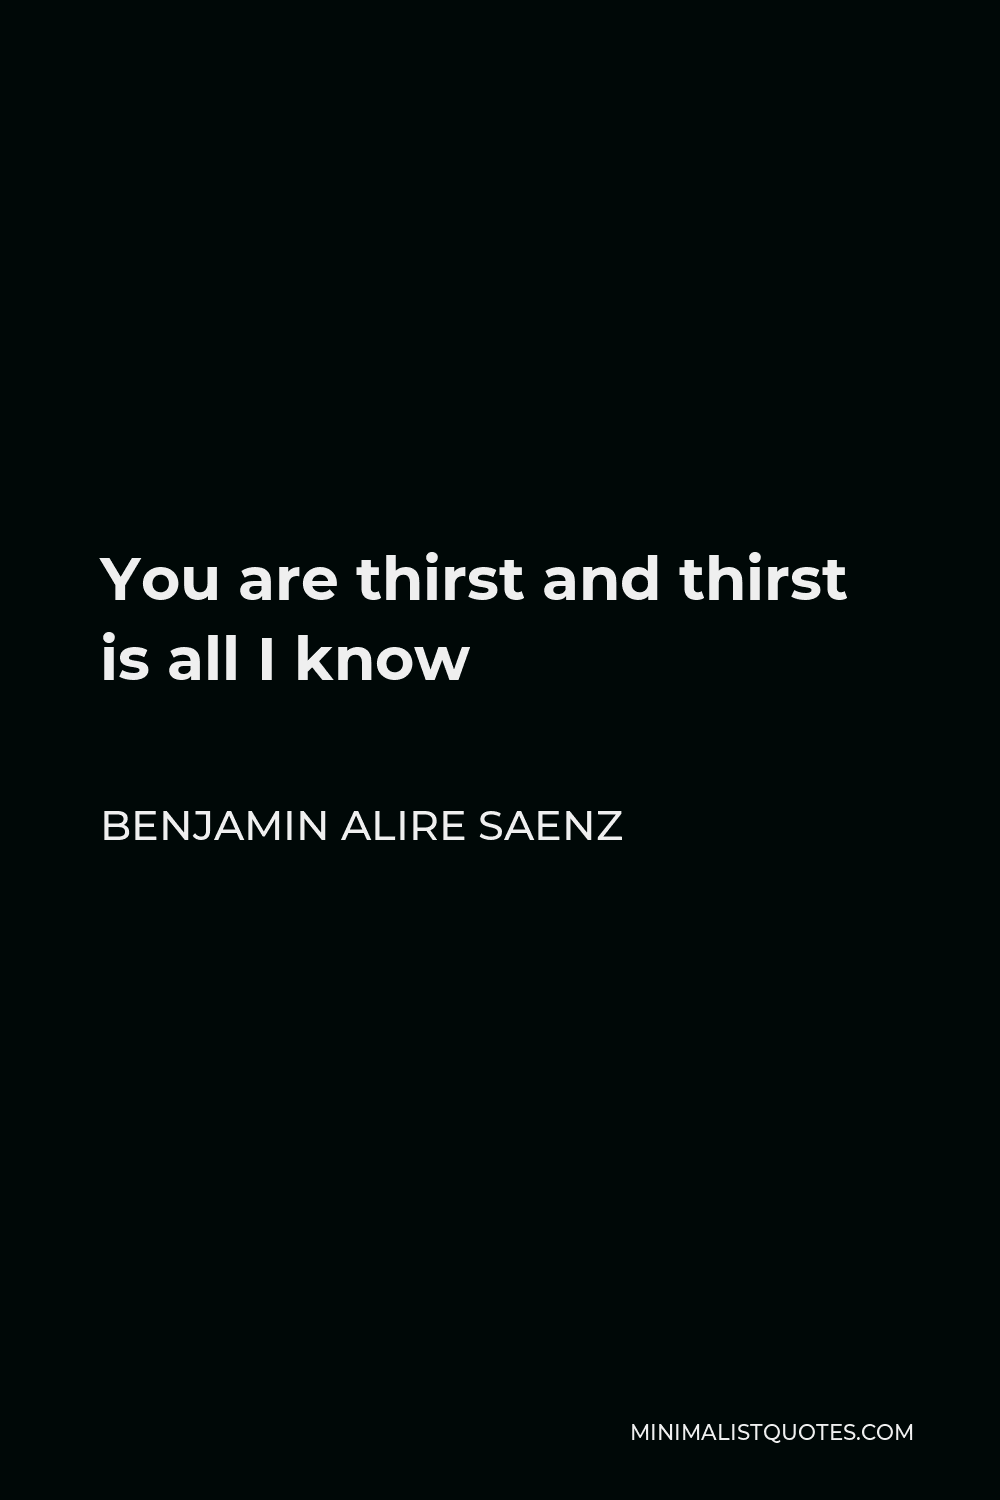 Benjamin Alire Saenz Quote - You are thirst and thirst is all I know